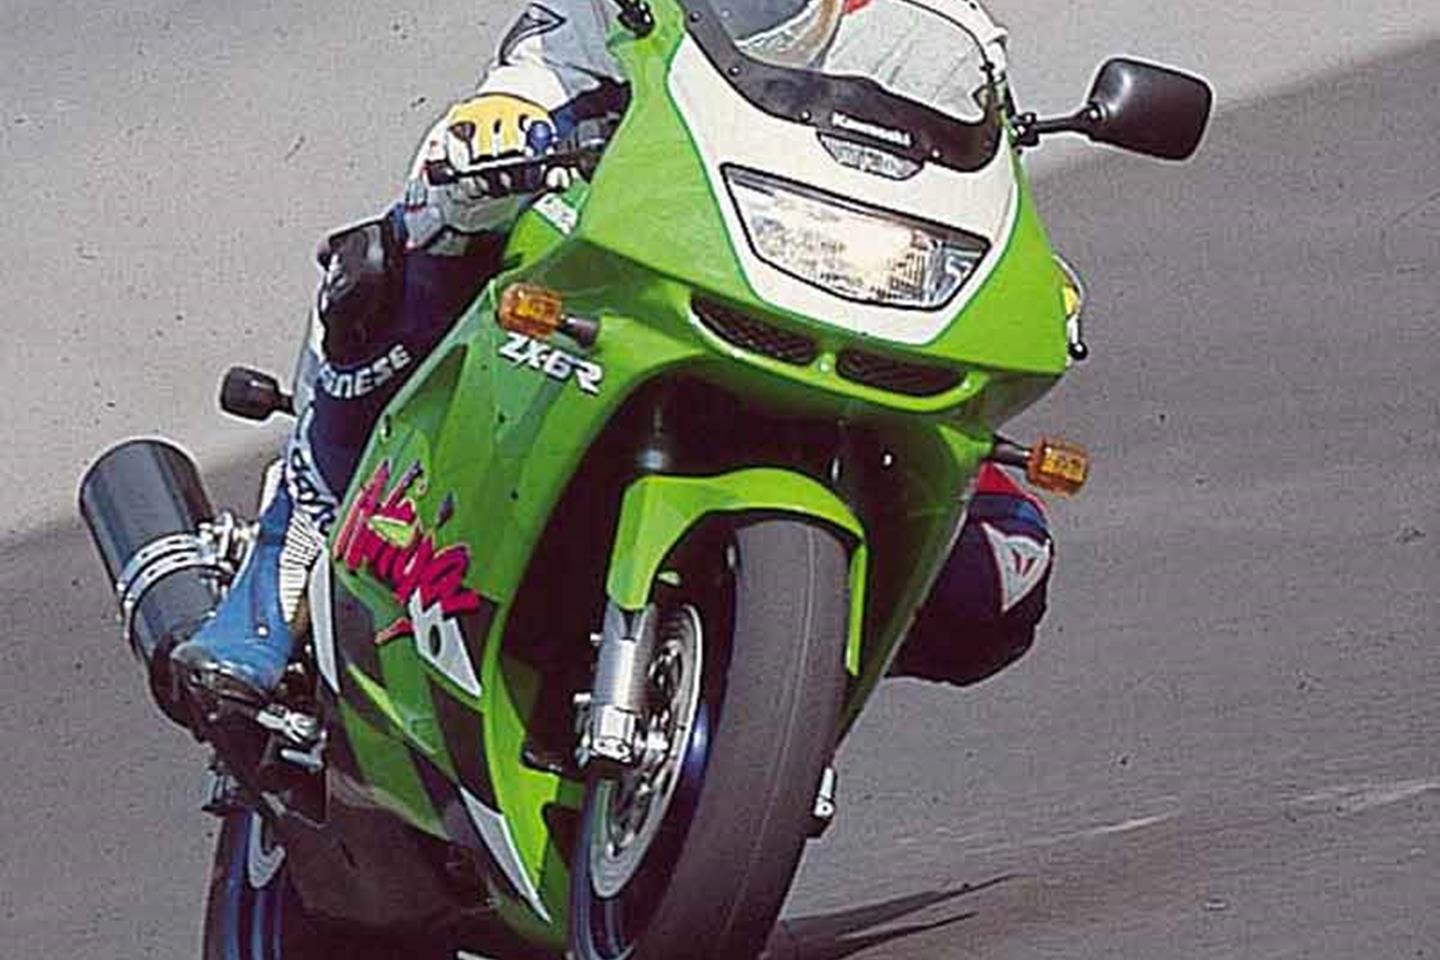 KAWASAKI ZX-6R (1995-1997) Review | Speed, Specs & Prices